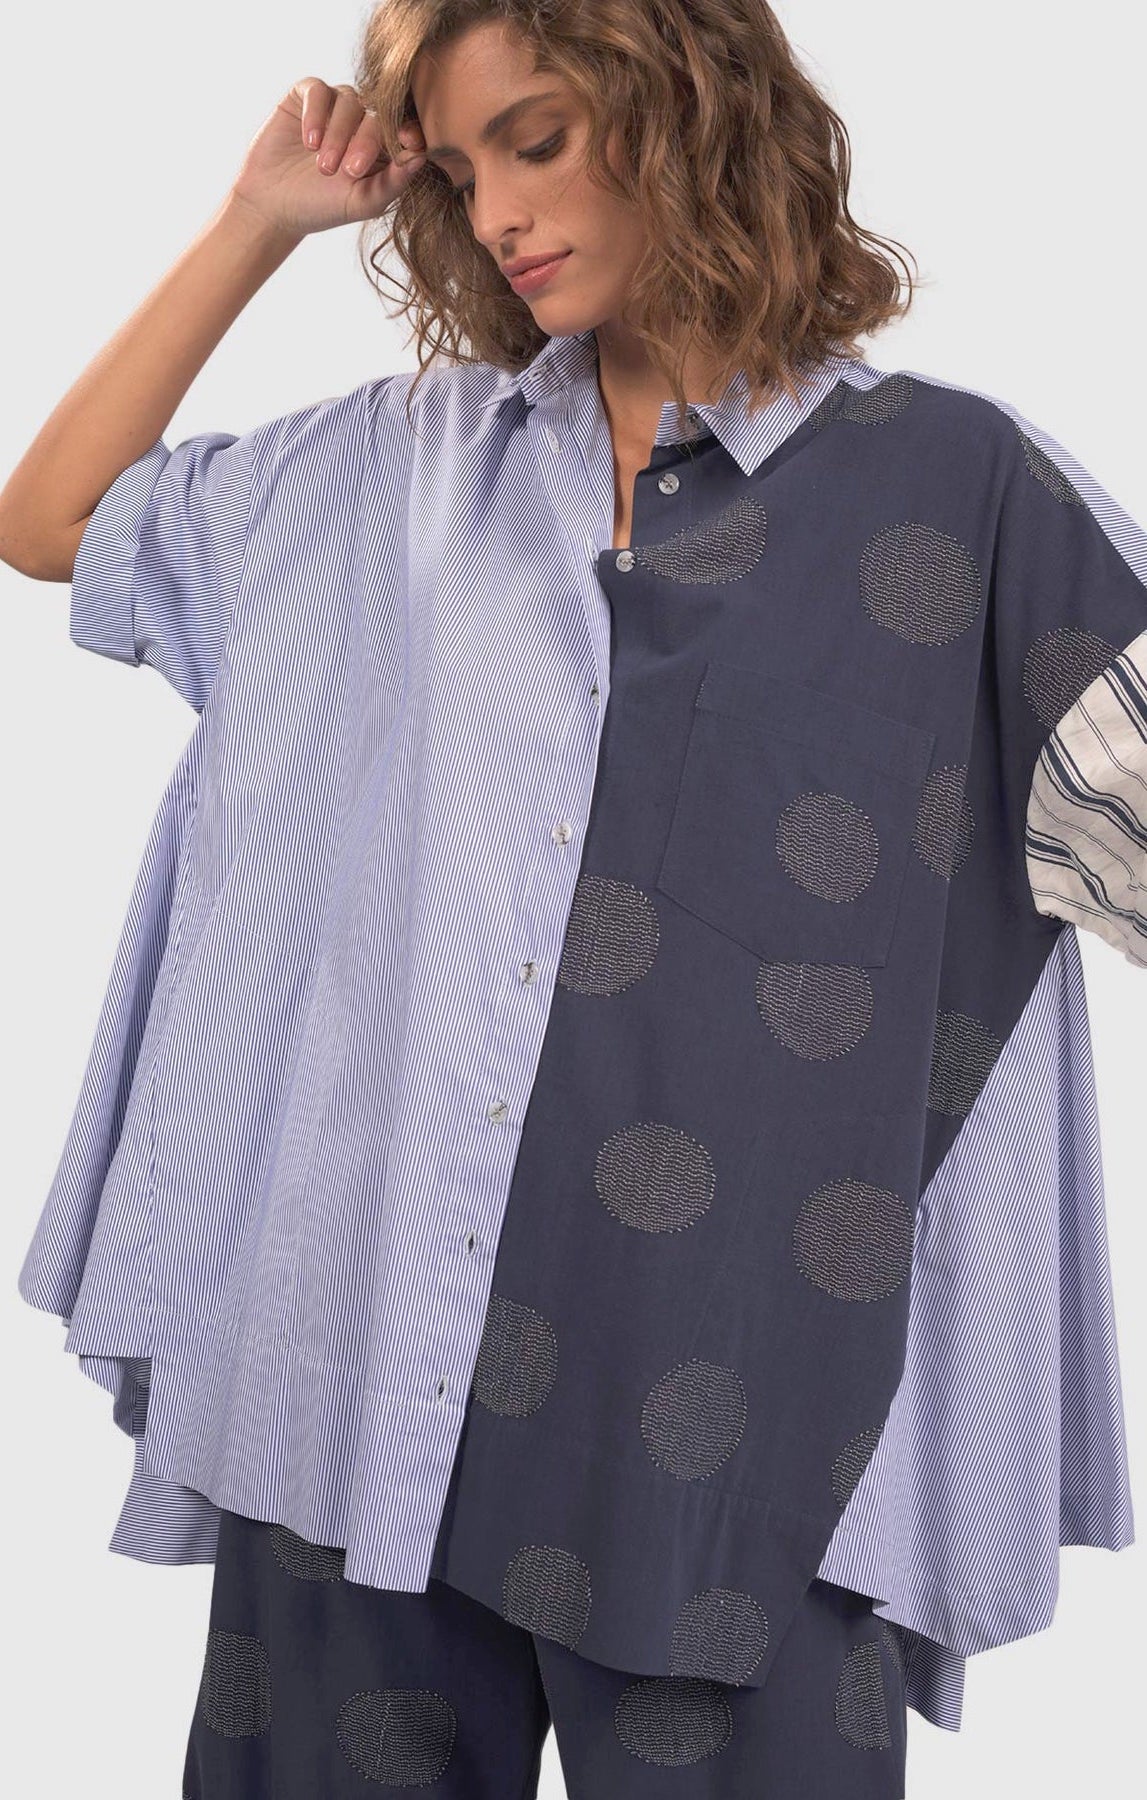 Front top half view of a woman wearing blue pants with green dots and the alembika navy short sleeve shirt. This shirt has blue and white stripes on the front right side and blue with green dots on the left side.